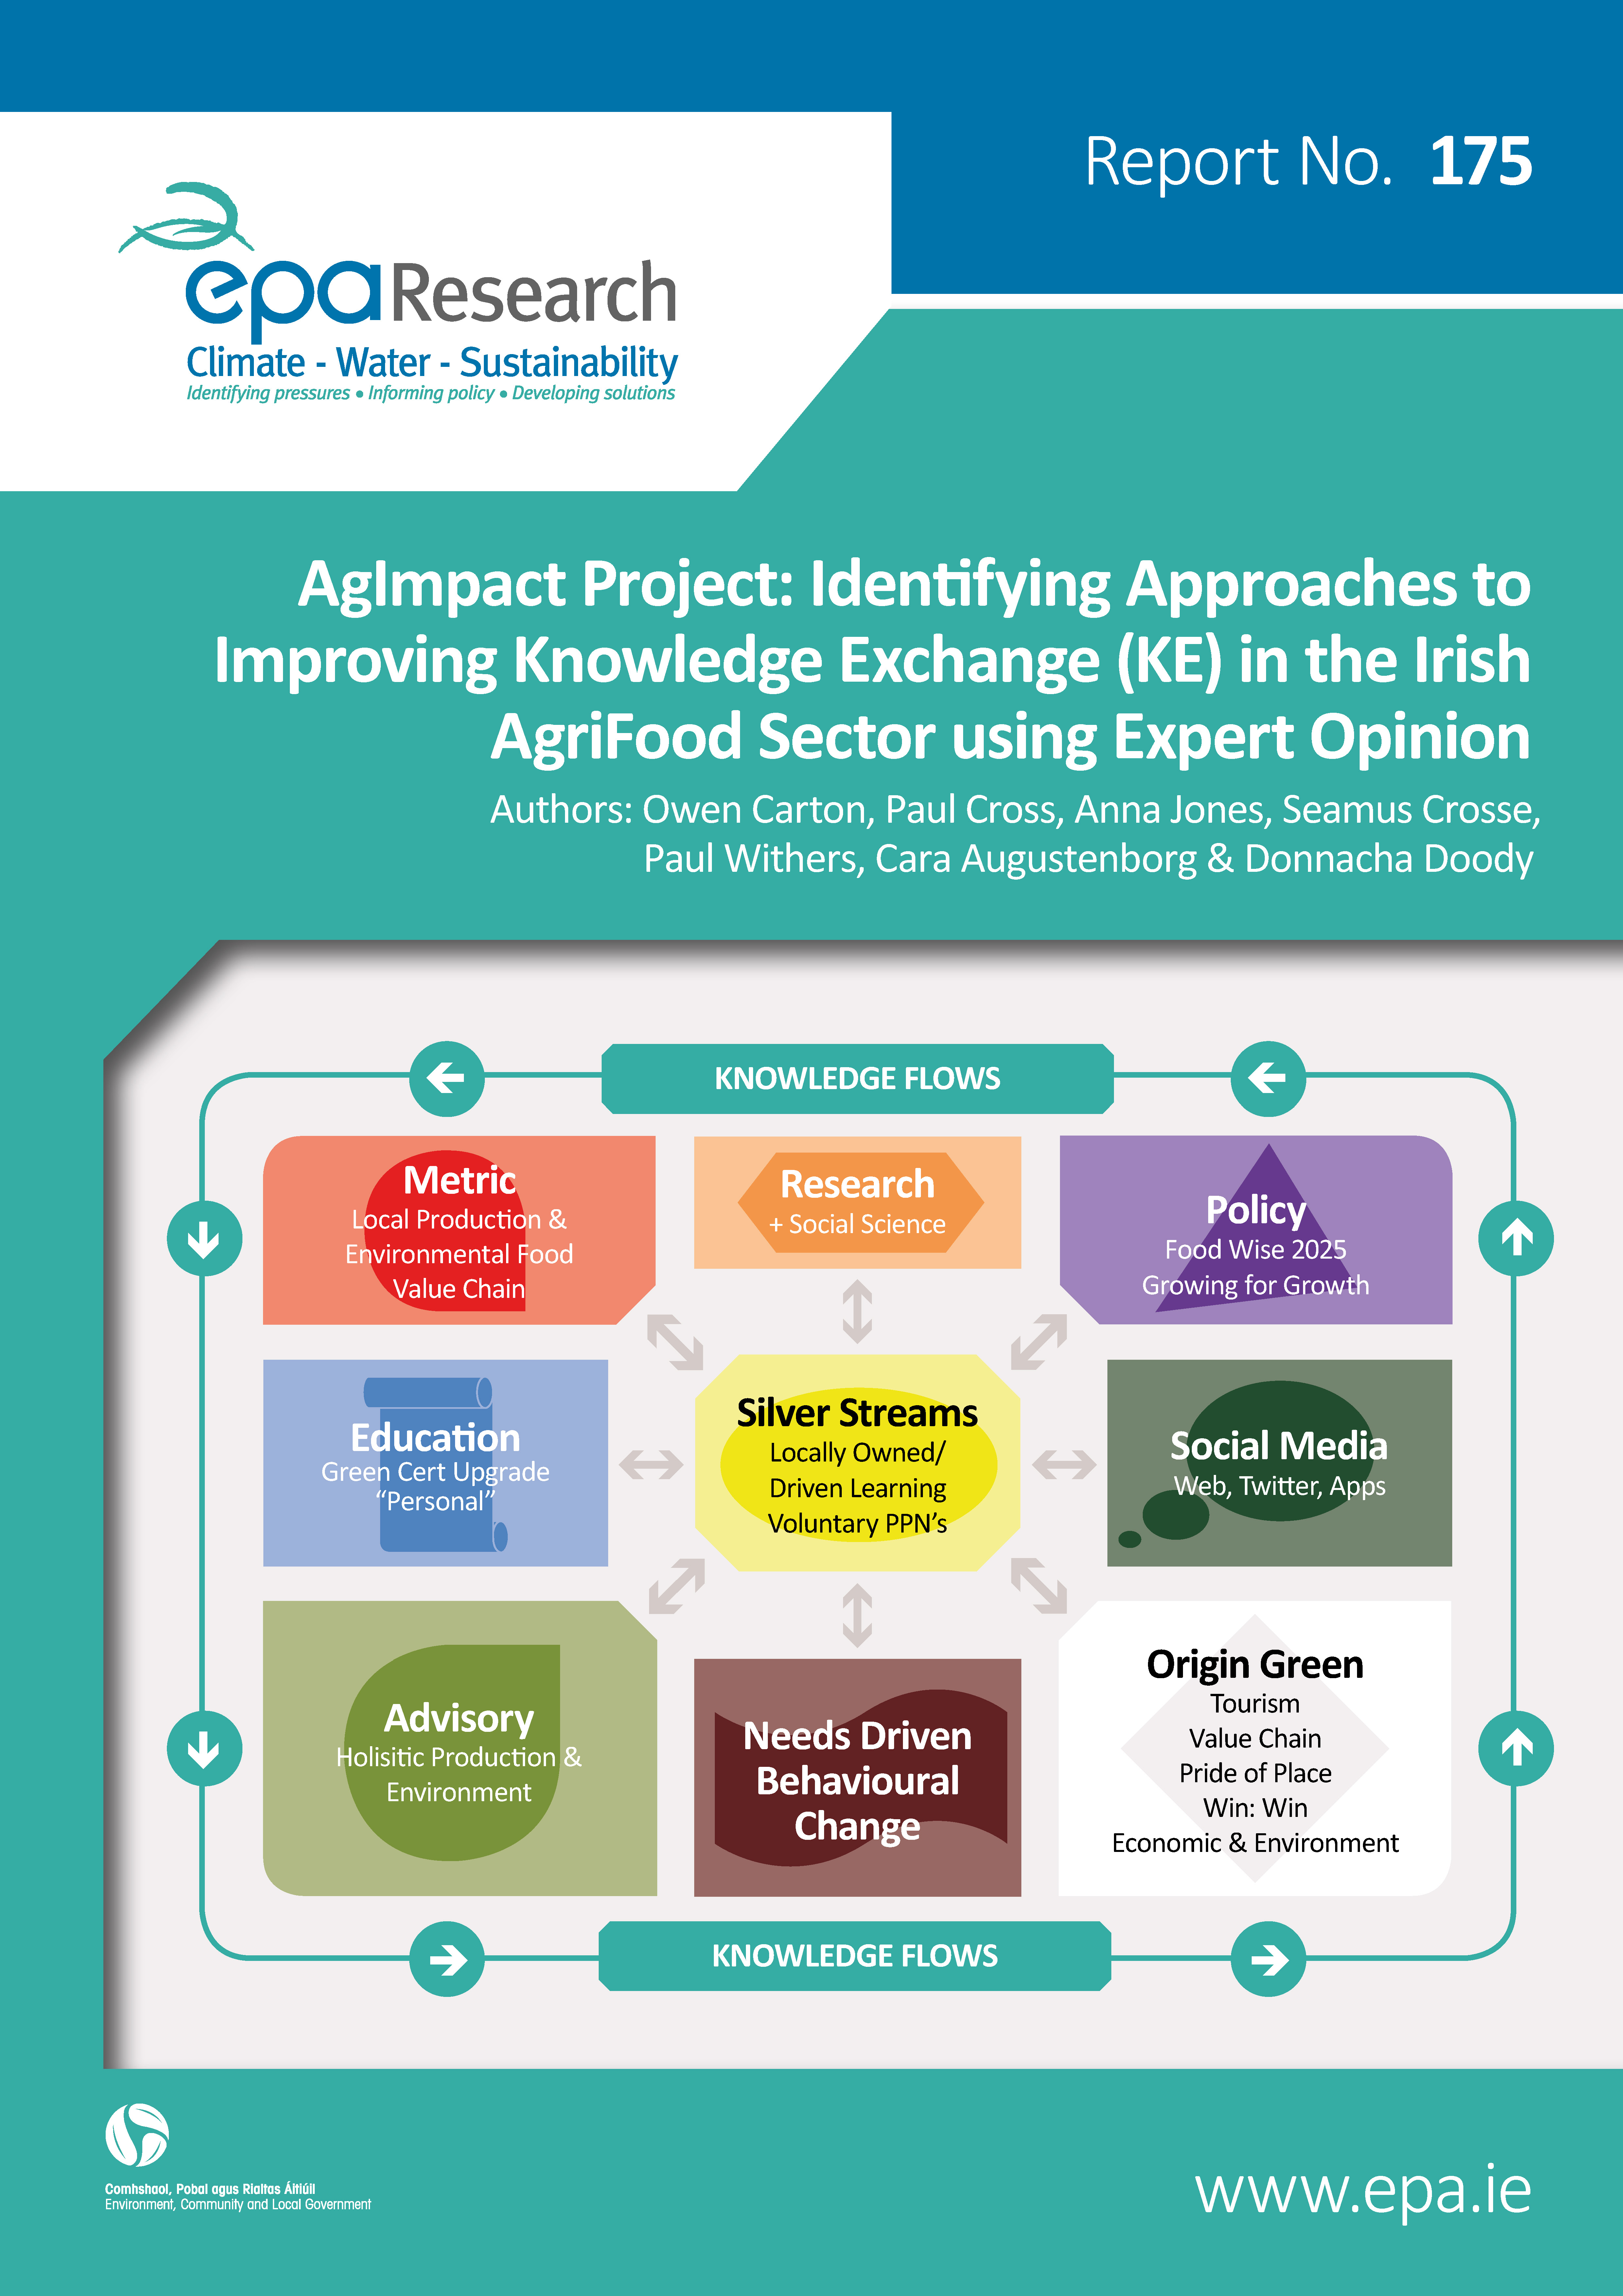 Cover of EPA Research Report 175 on Knowledge Transfer in the agricultural and food sector.